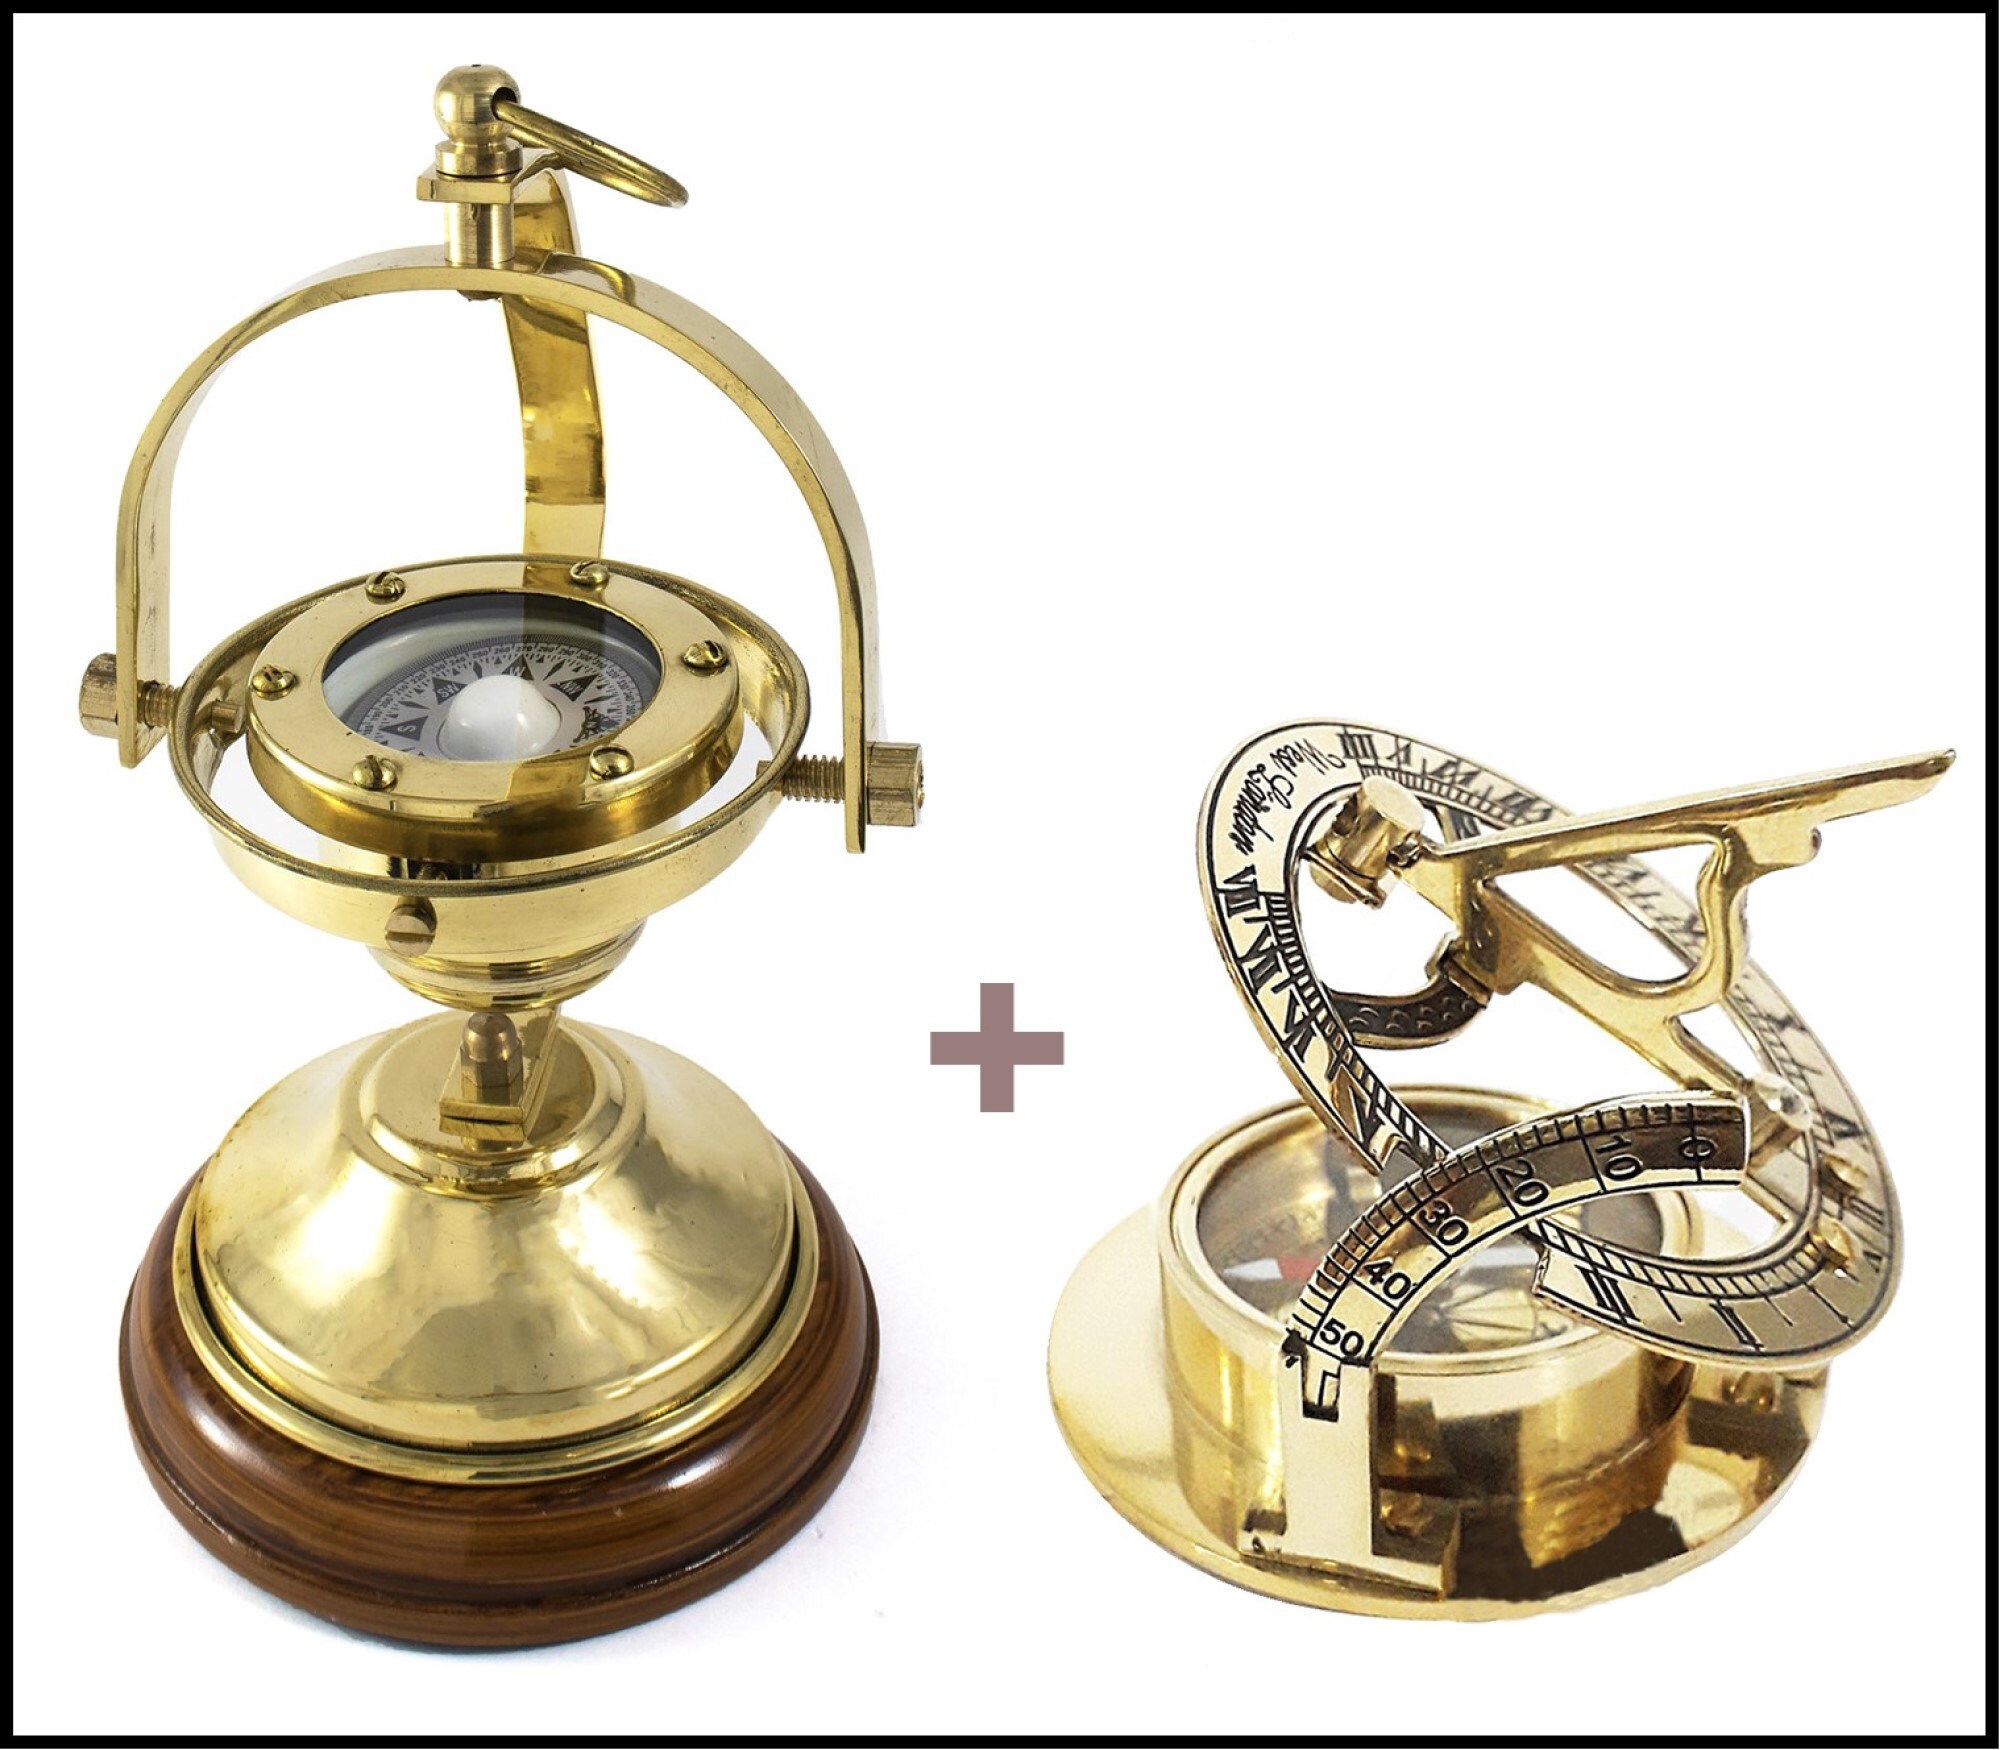 Ship's Compass Binnacle Gimballed Observation Table-Top Marine Christmas Gifts. 